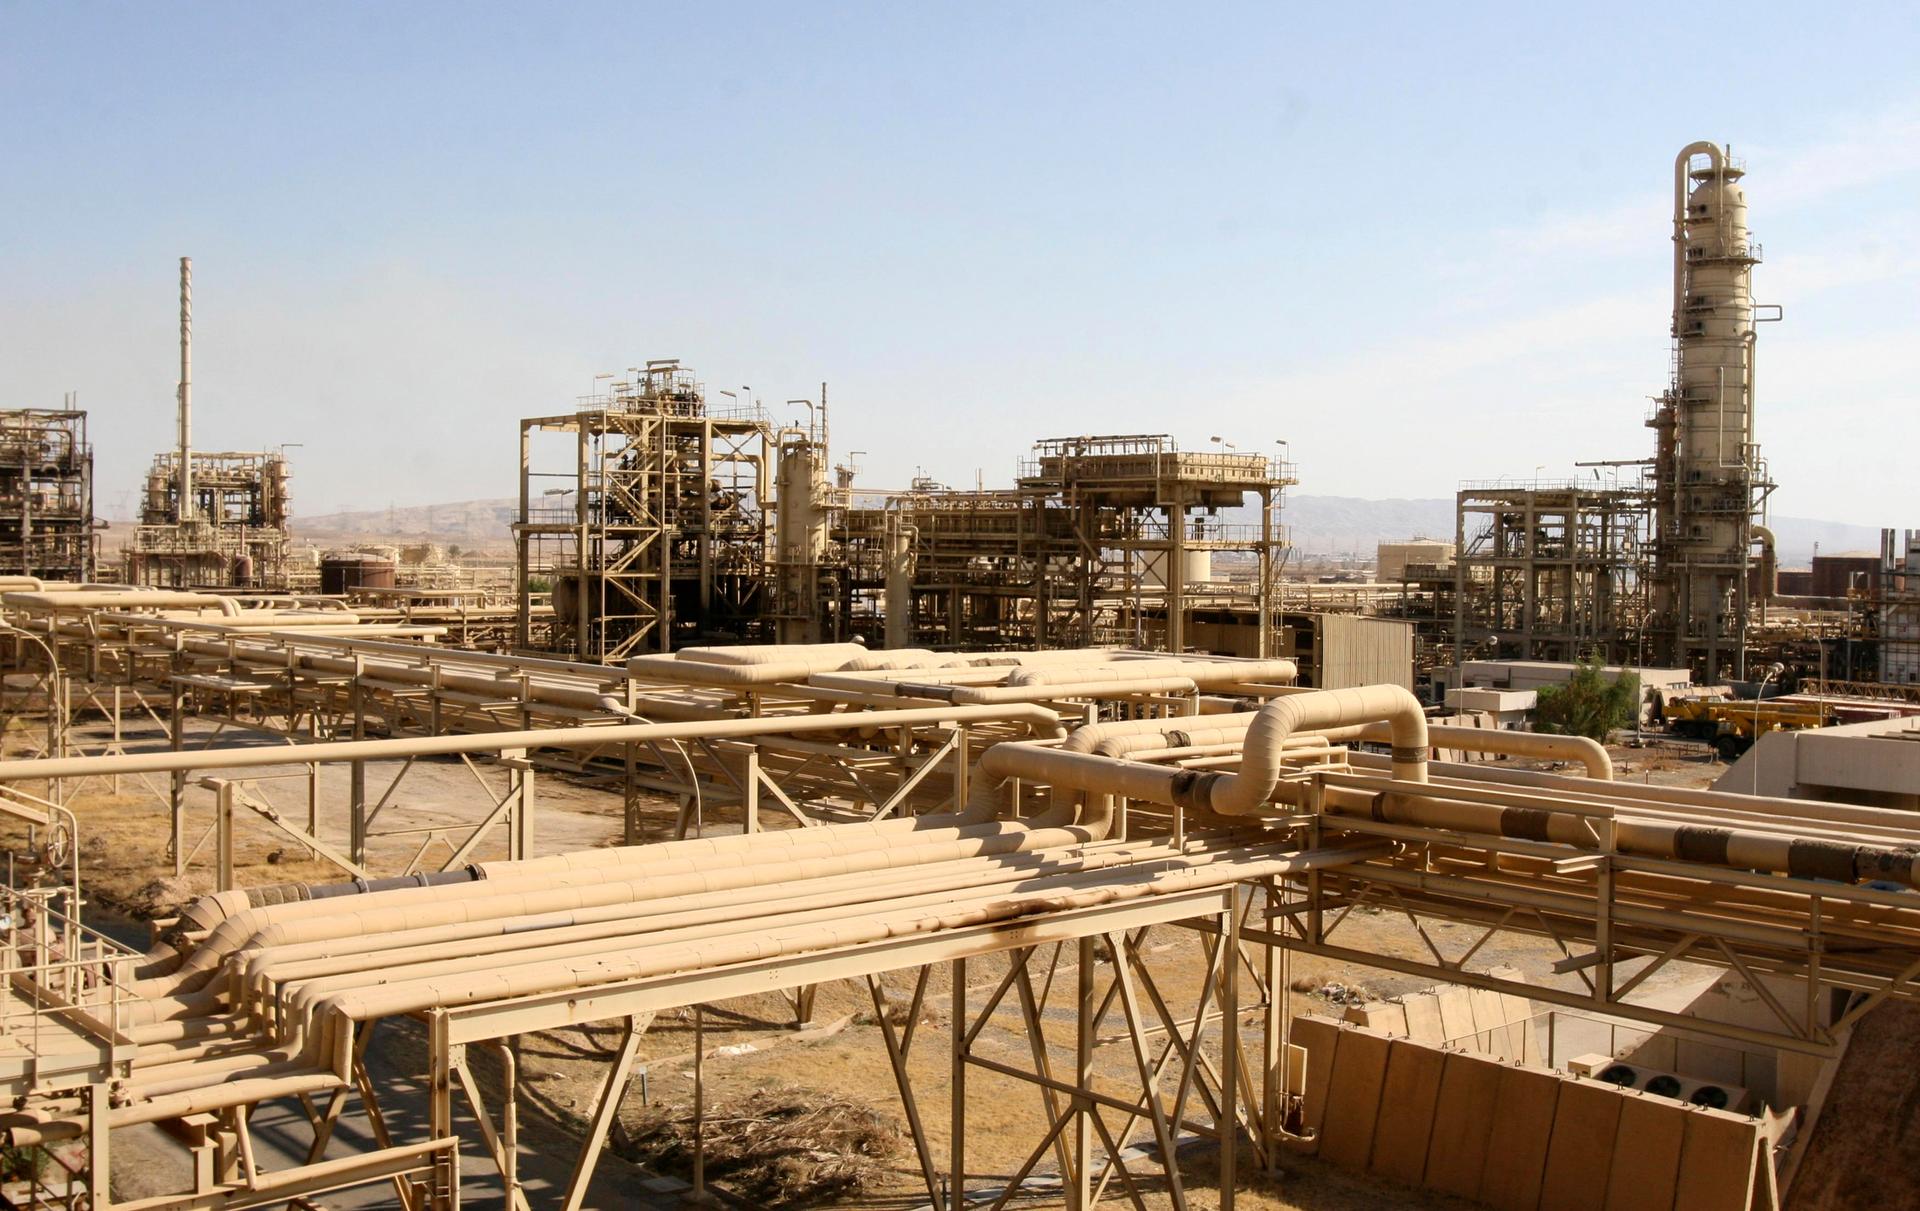 A view of the oil refinery in Baiji, Iraq, taken in 2007, when it was operational. The refinery has been shut down since June 2014.